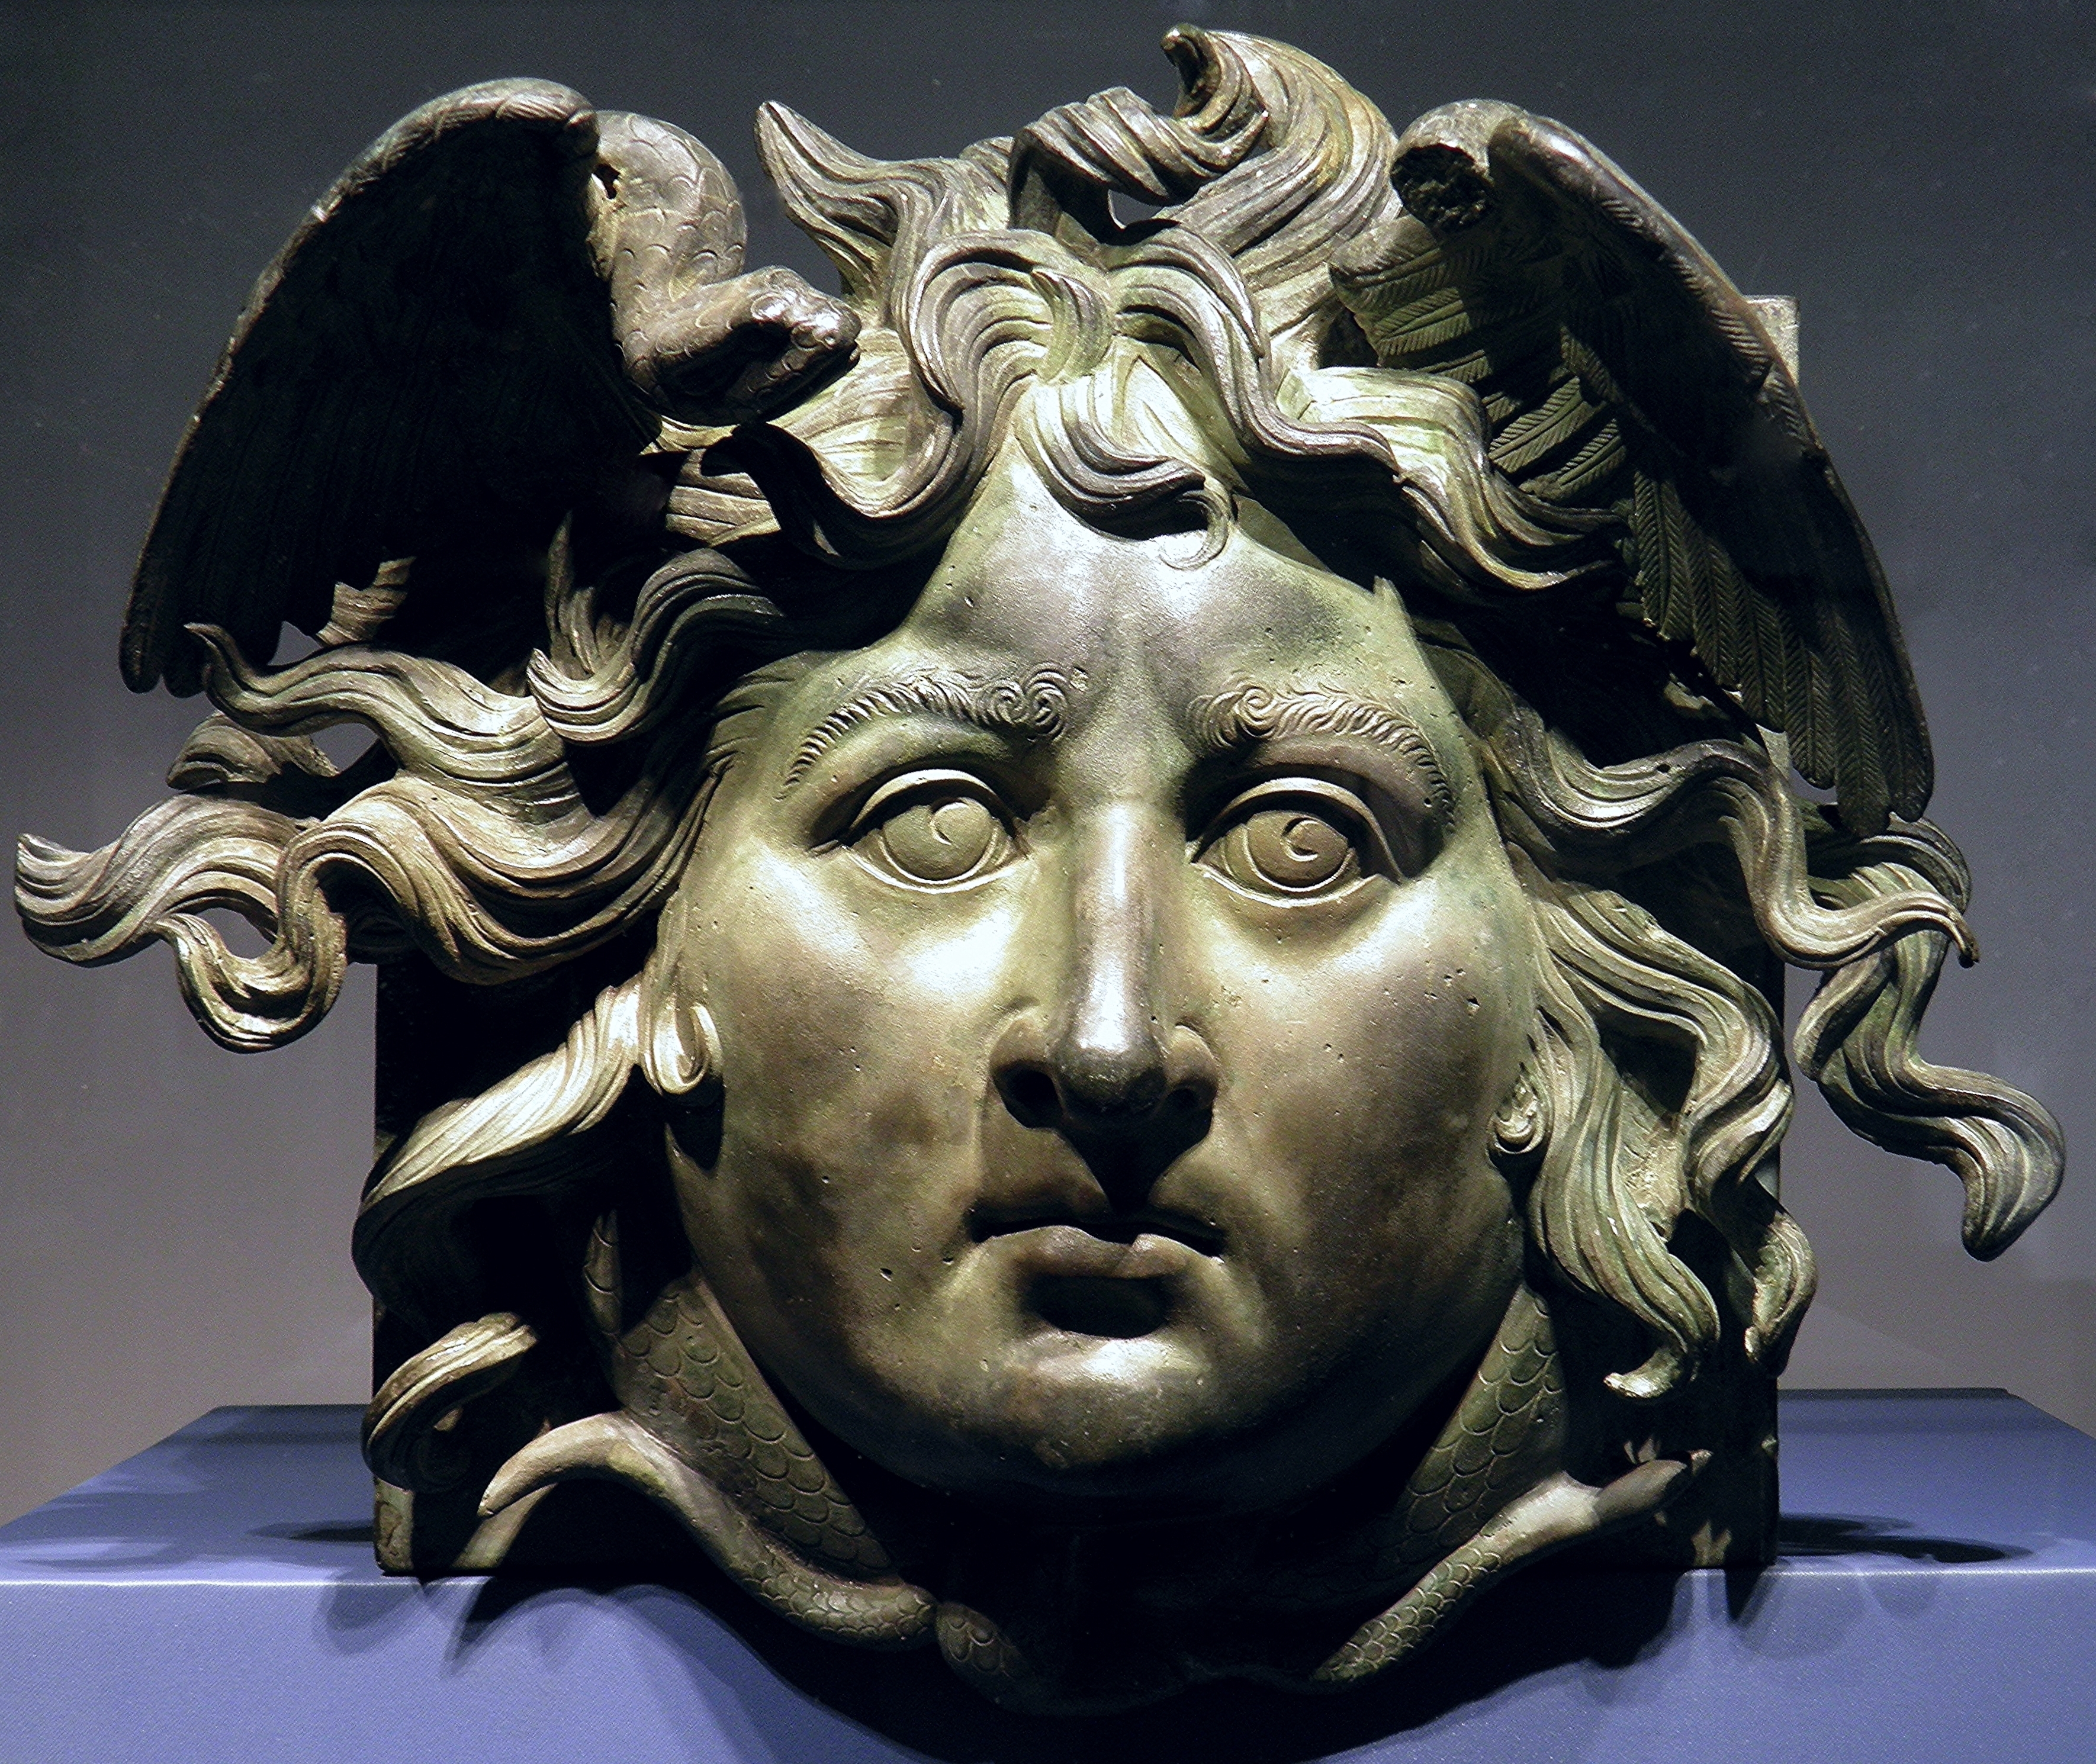 Medusa and Her Sisters: The Gorgons – Women in Antiquity